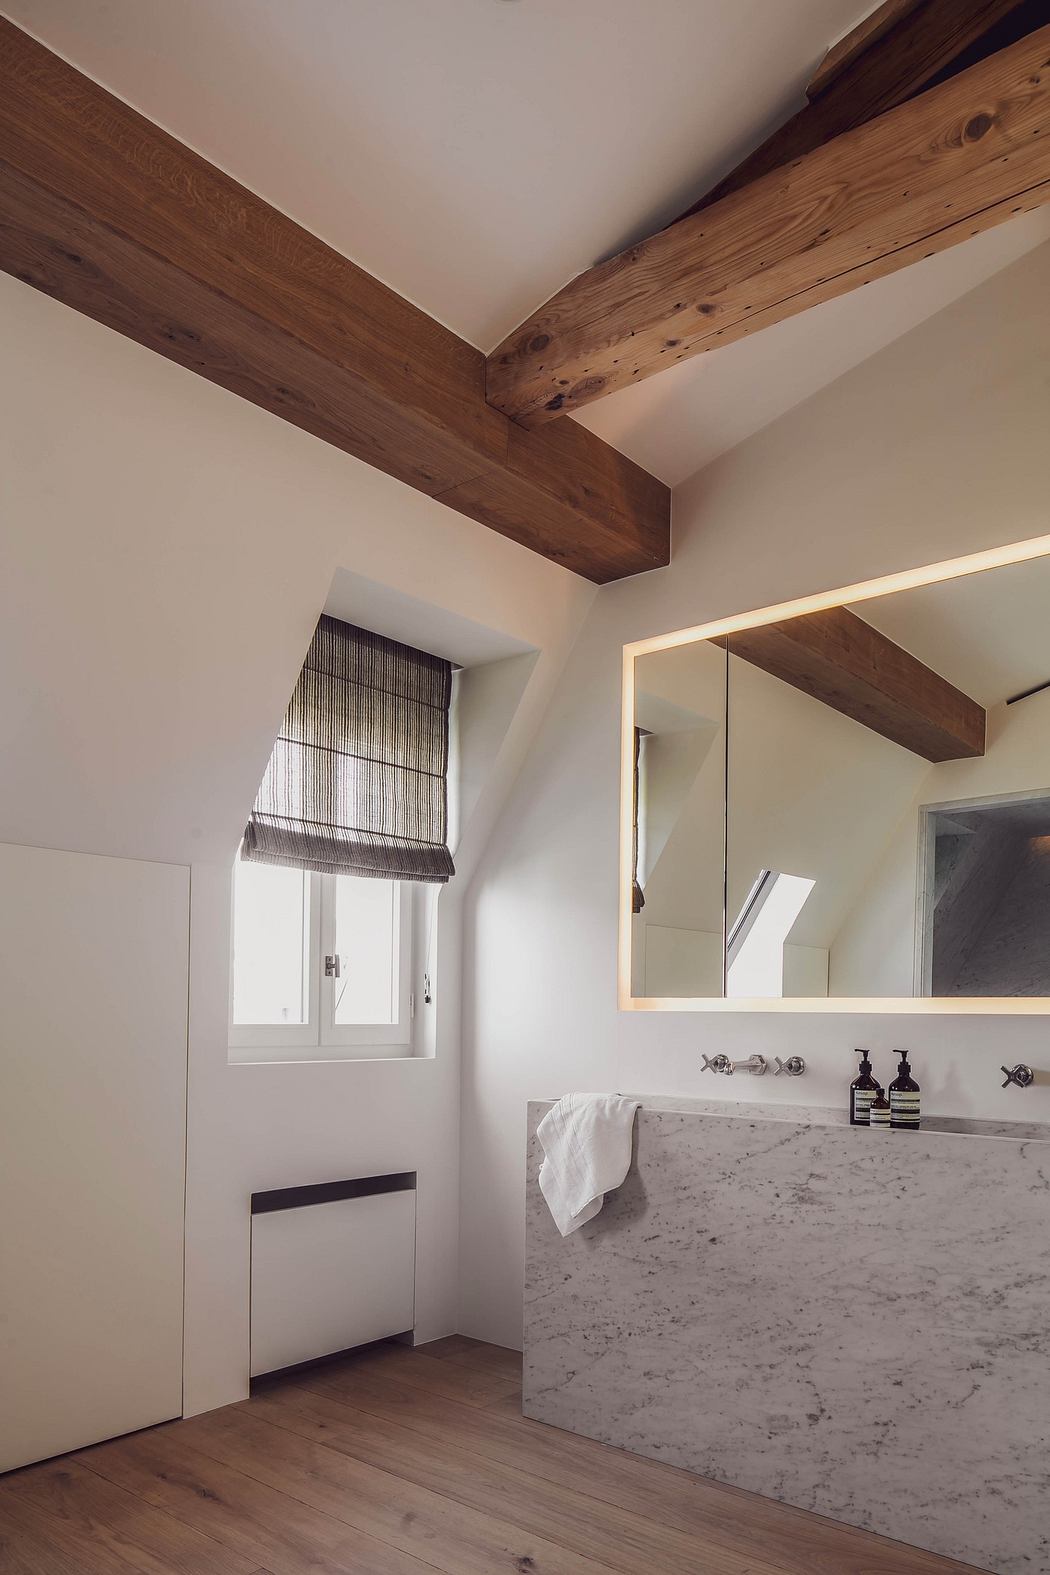 Minimalist bathroom with exposed wooden beams and marble sink.